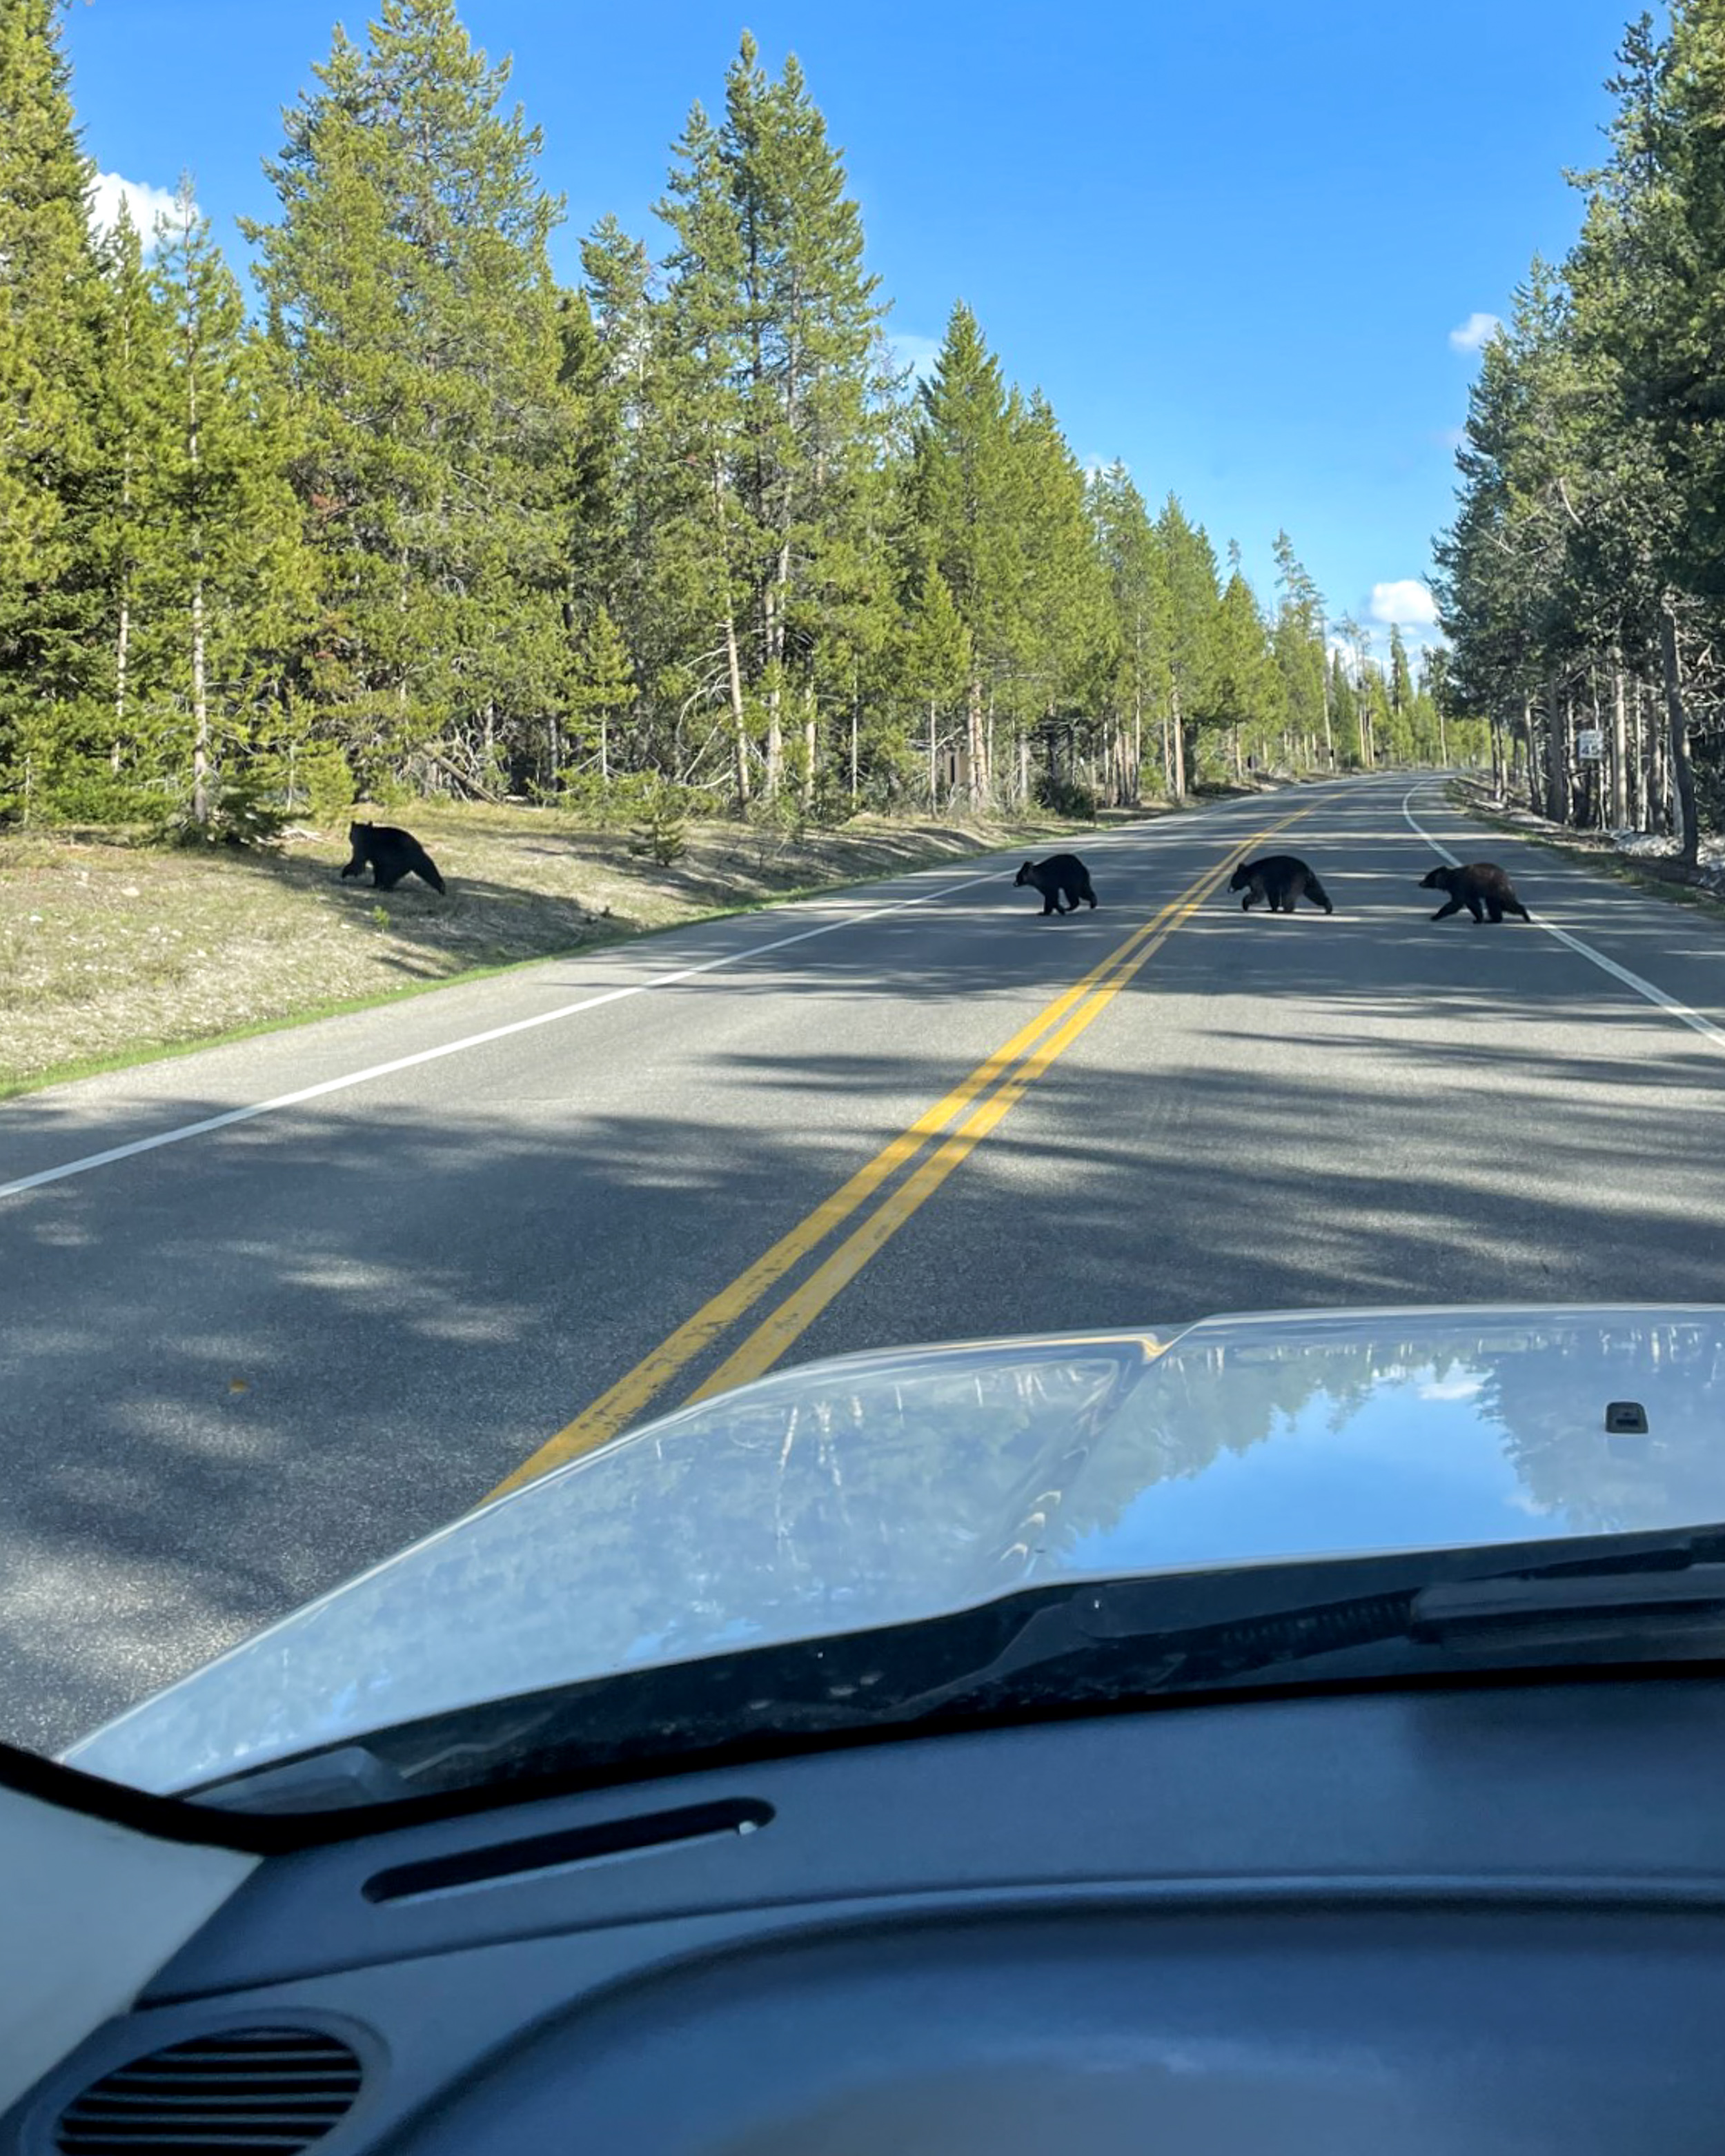 A family of four black bears, including a sow and three cubs, cross a park road in front of a vehicle.